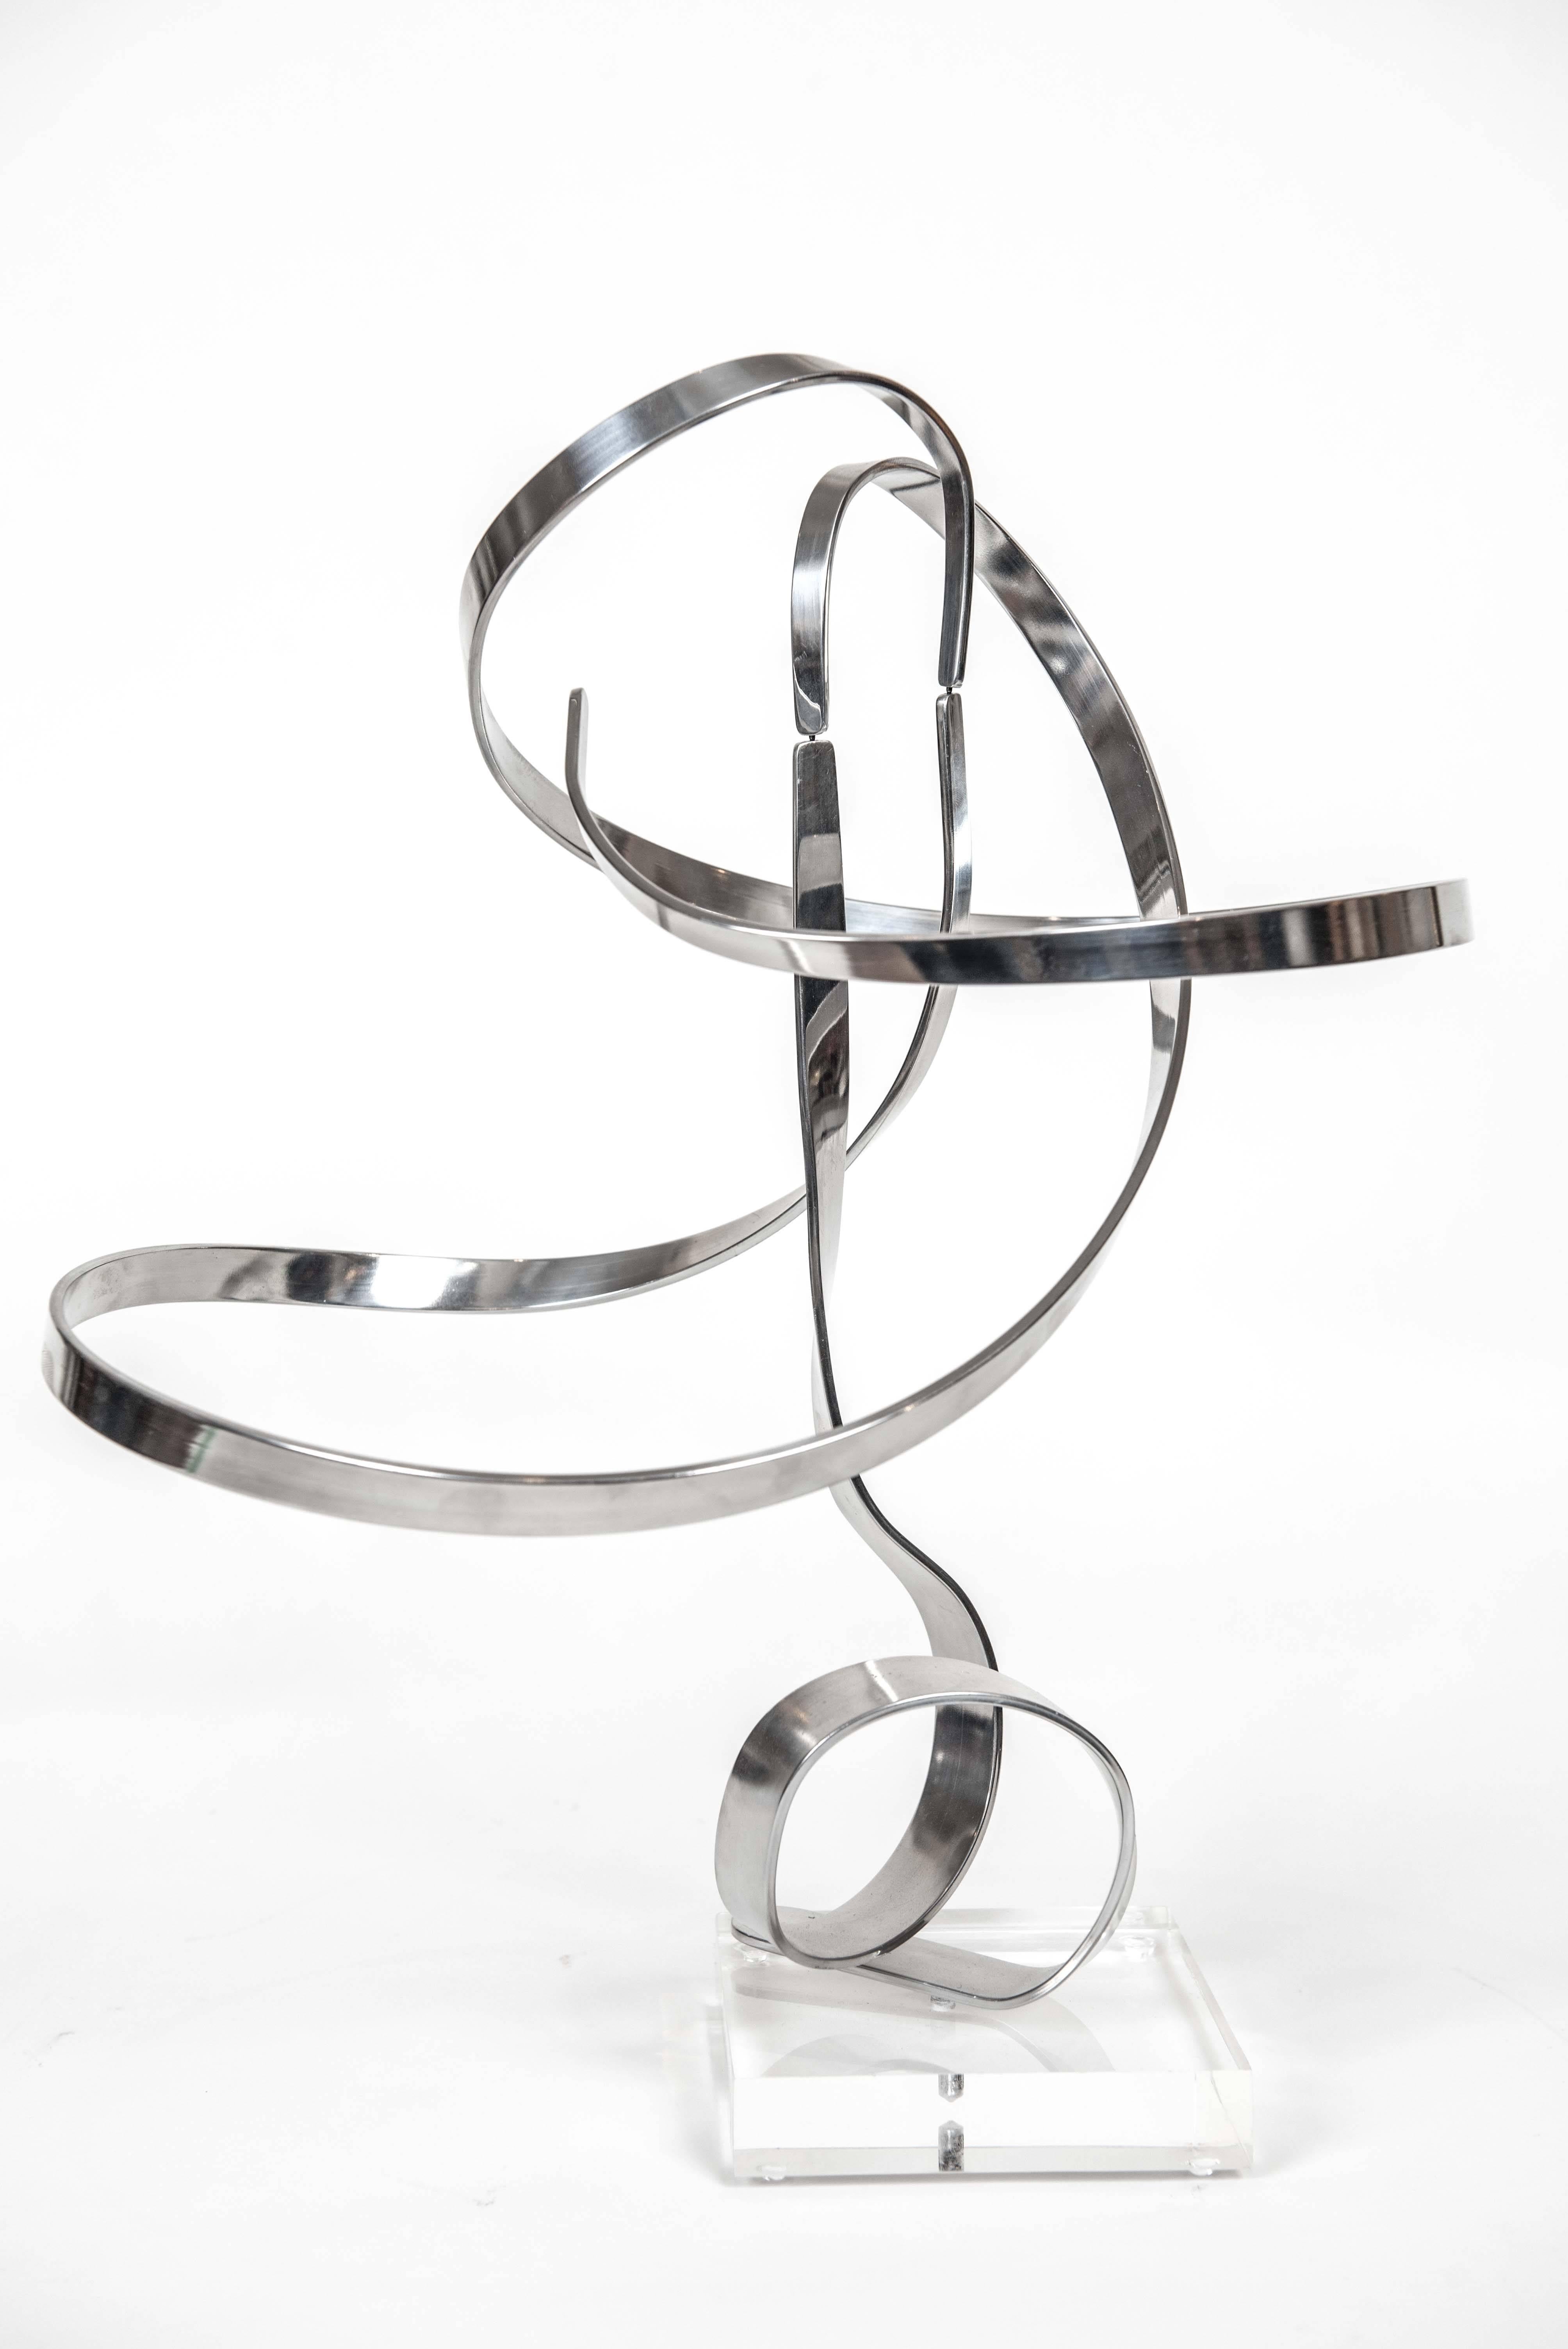 Late 20th Century Kinetic Aluminum Sculpture by American Charles Taylor, circa 1975